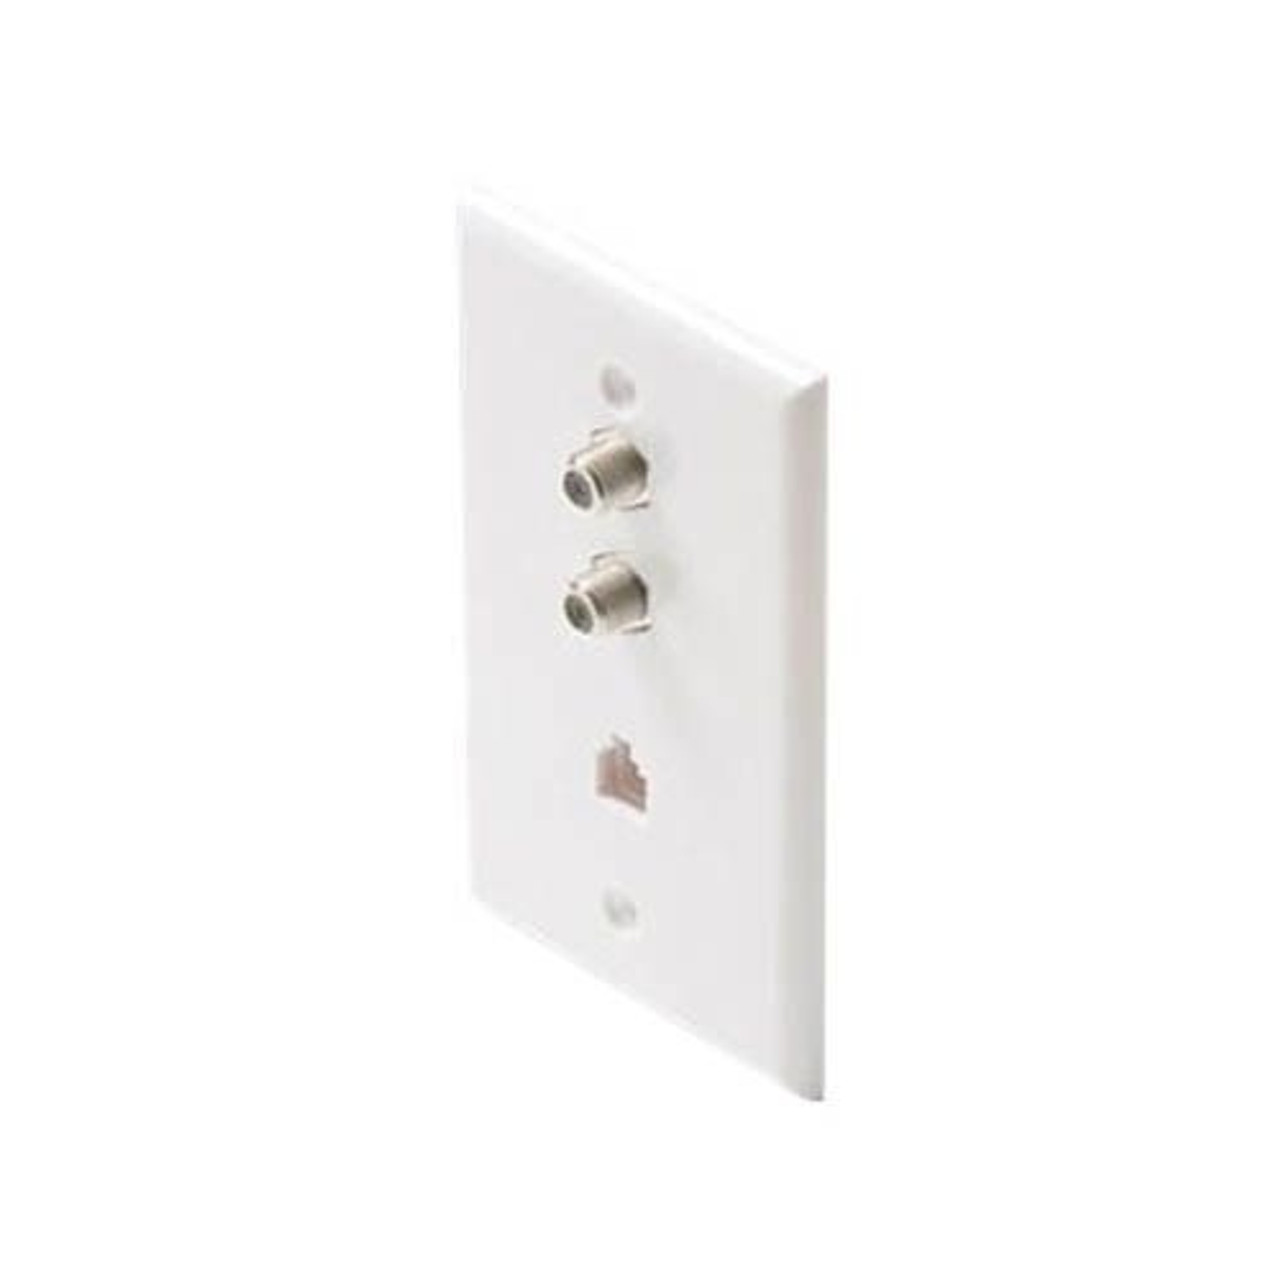 Steren 300-238WH 2.5 GHz Dual F Connector and Single Phone Wall Plate White RJ11 Coaxial Cable Combo RJ-11 Connector Modular Jack Telephone, TV Antenna Video Coaxial Cable Connectors, Part # 300238-WH